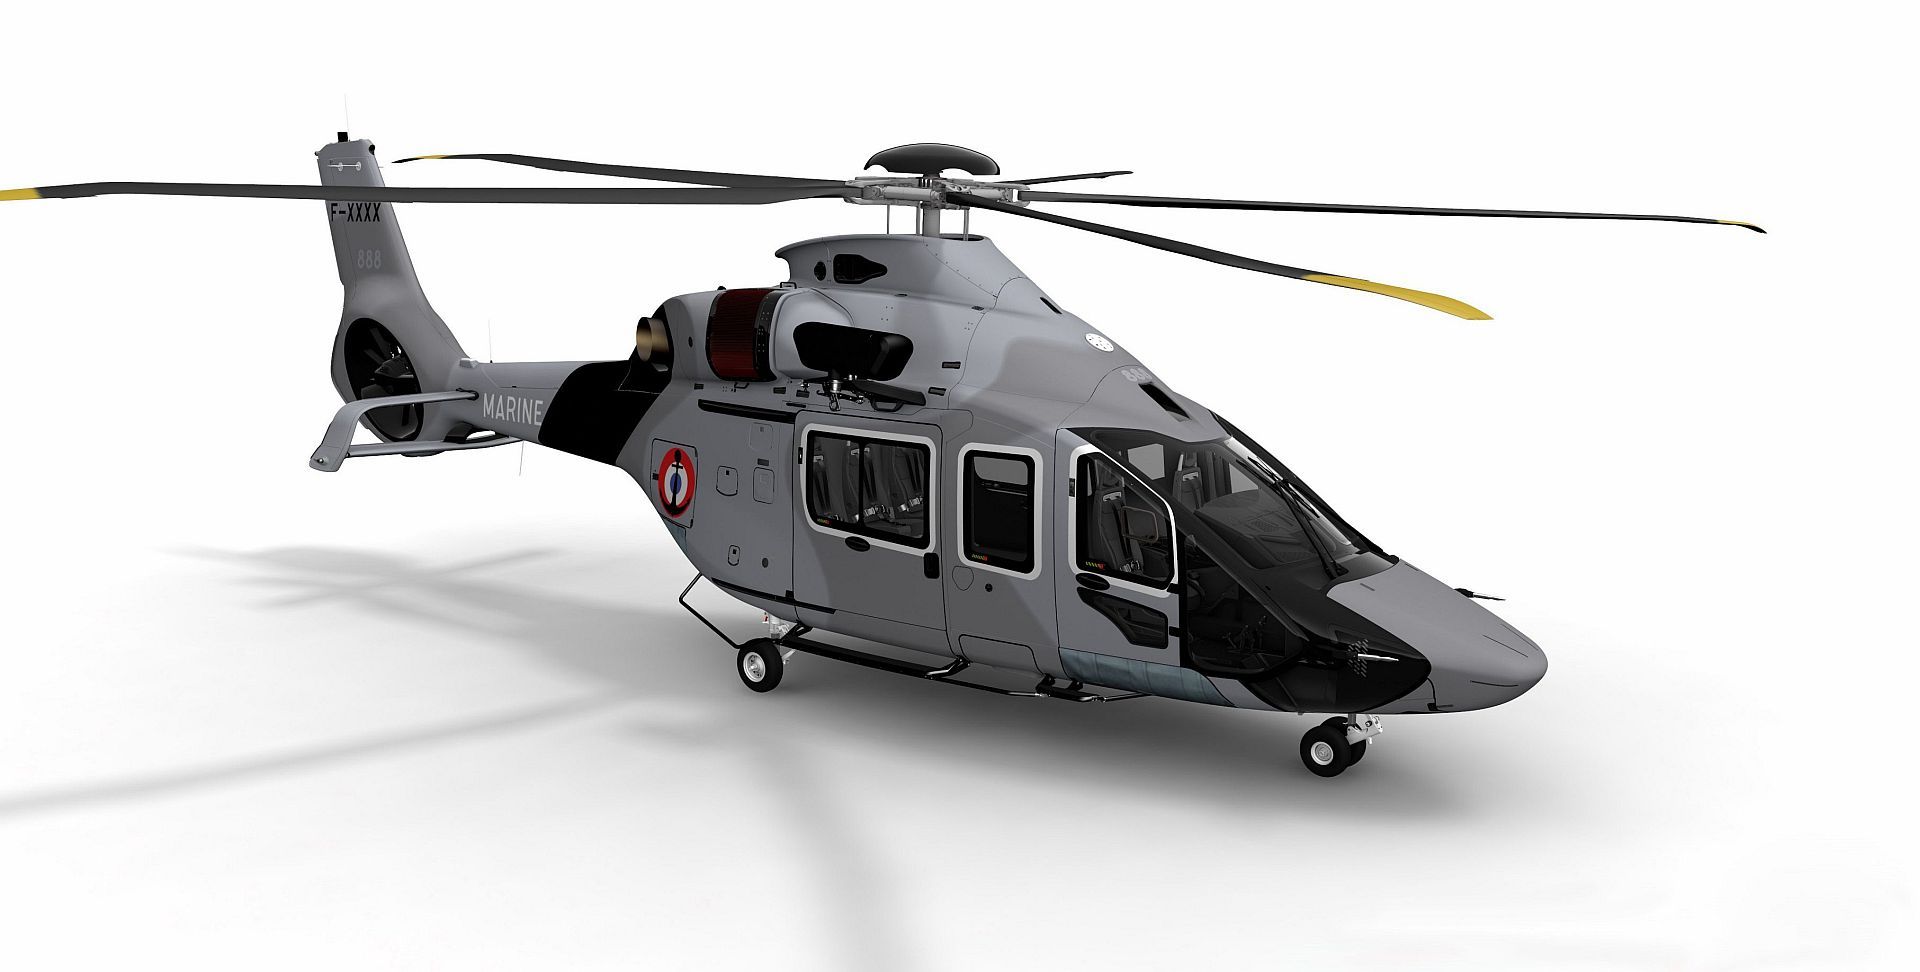 H160s For The French Navy